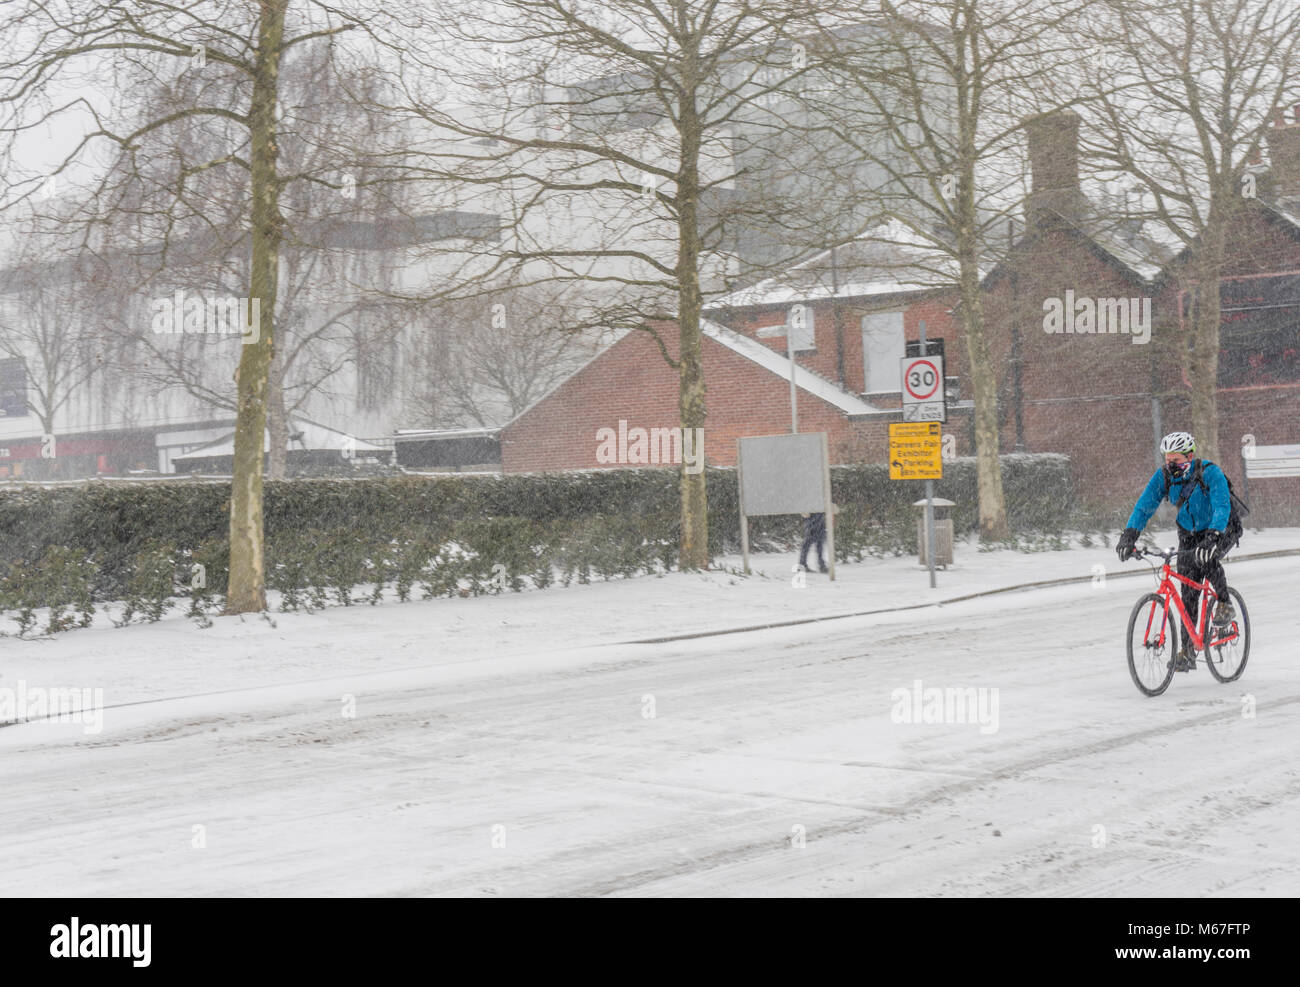 Southampton, UK. 1st of March 2018. Heavy snow has caused the University of Southampton (England, UK) to shut down for business for the rest of the day as well as tomorrow due to adverse and hazardous weather conditions. Pictured here is a cyclist braving the roads which are dangerous to use. Stock Photo